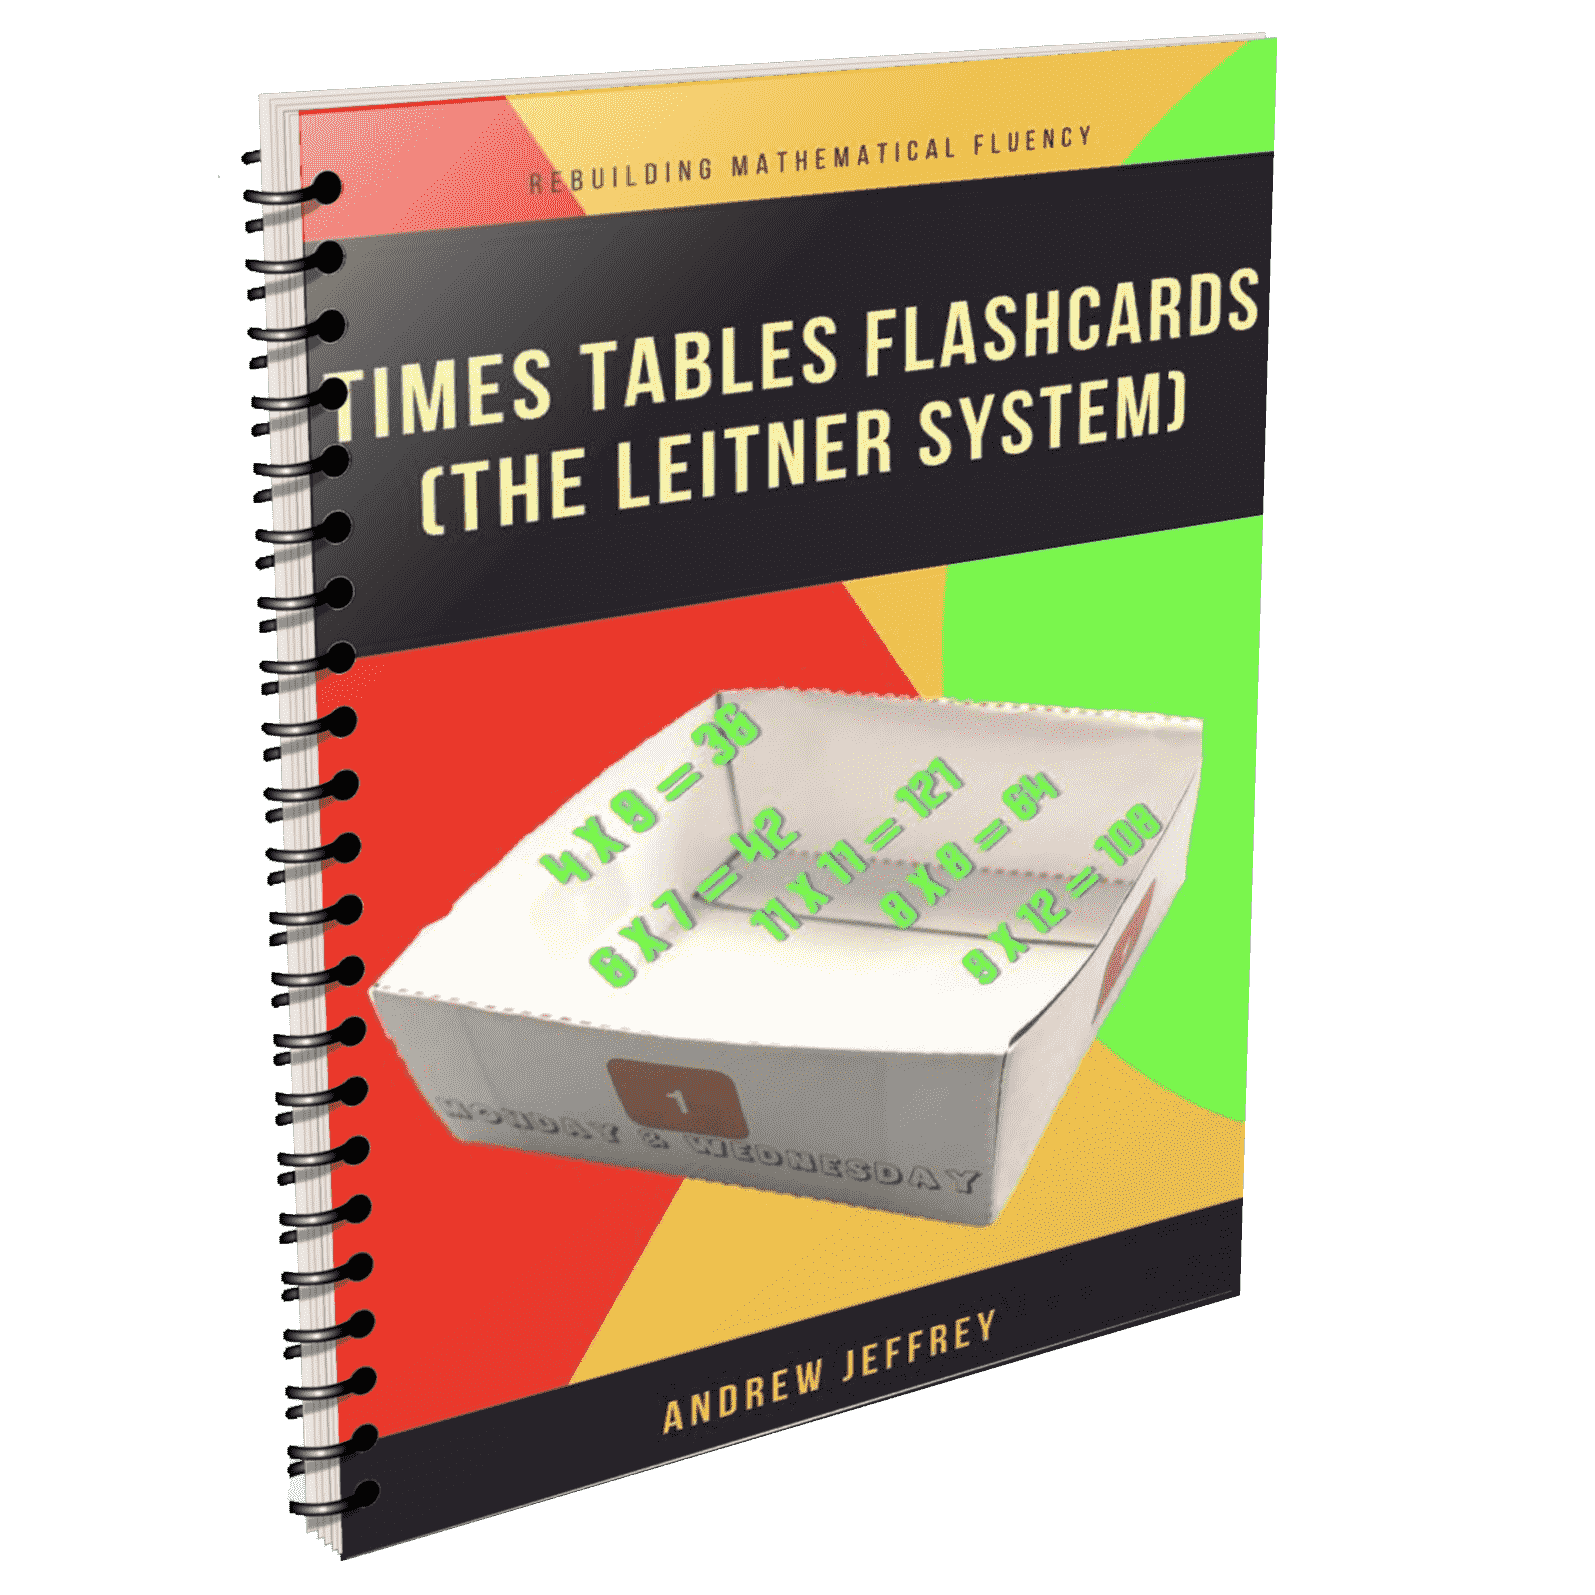 The Leitner Flashcard Project – Andrew Jeffrey